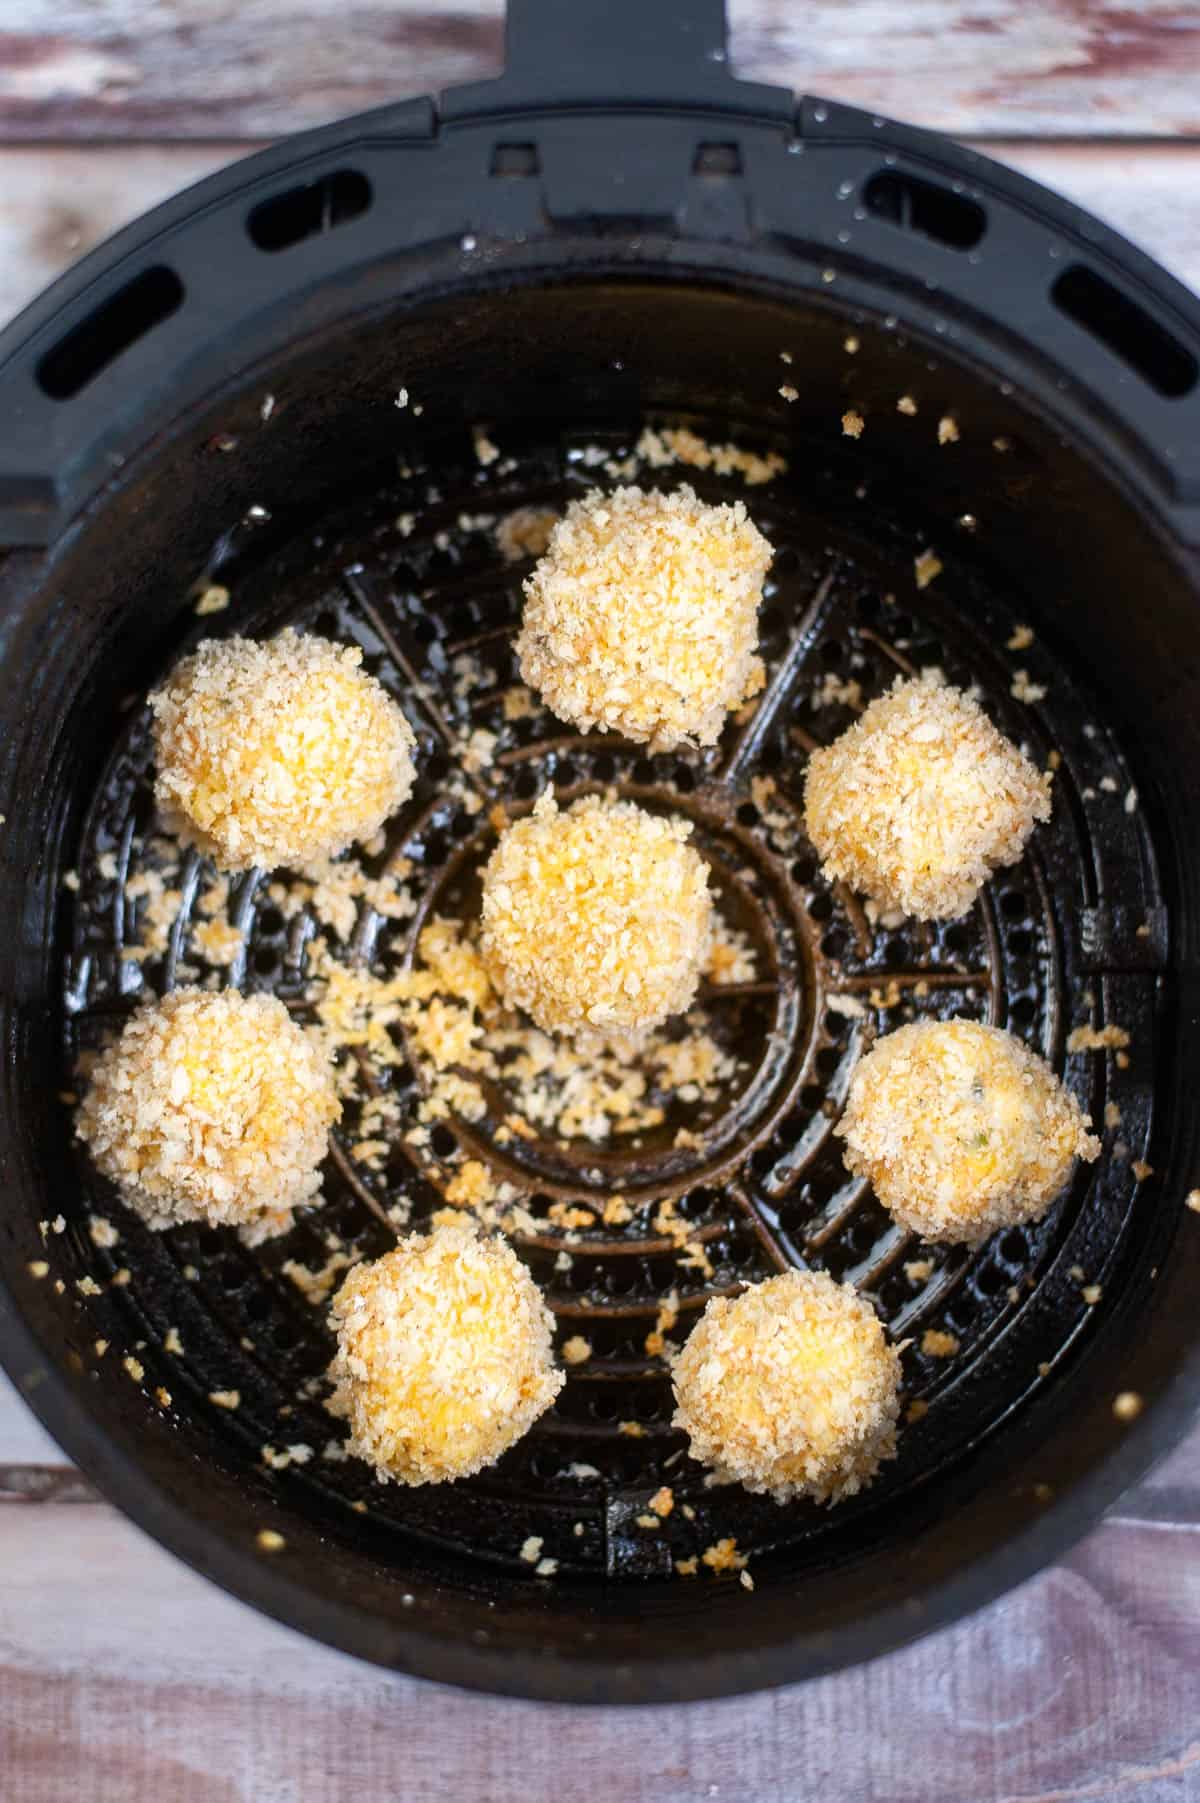 The air fryer is filled with jalapeno popper bites.